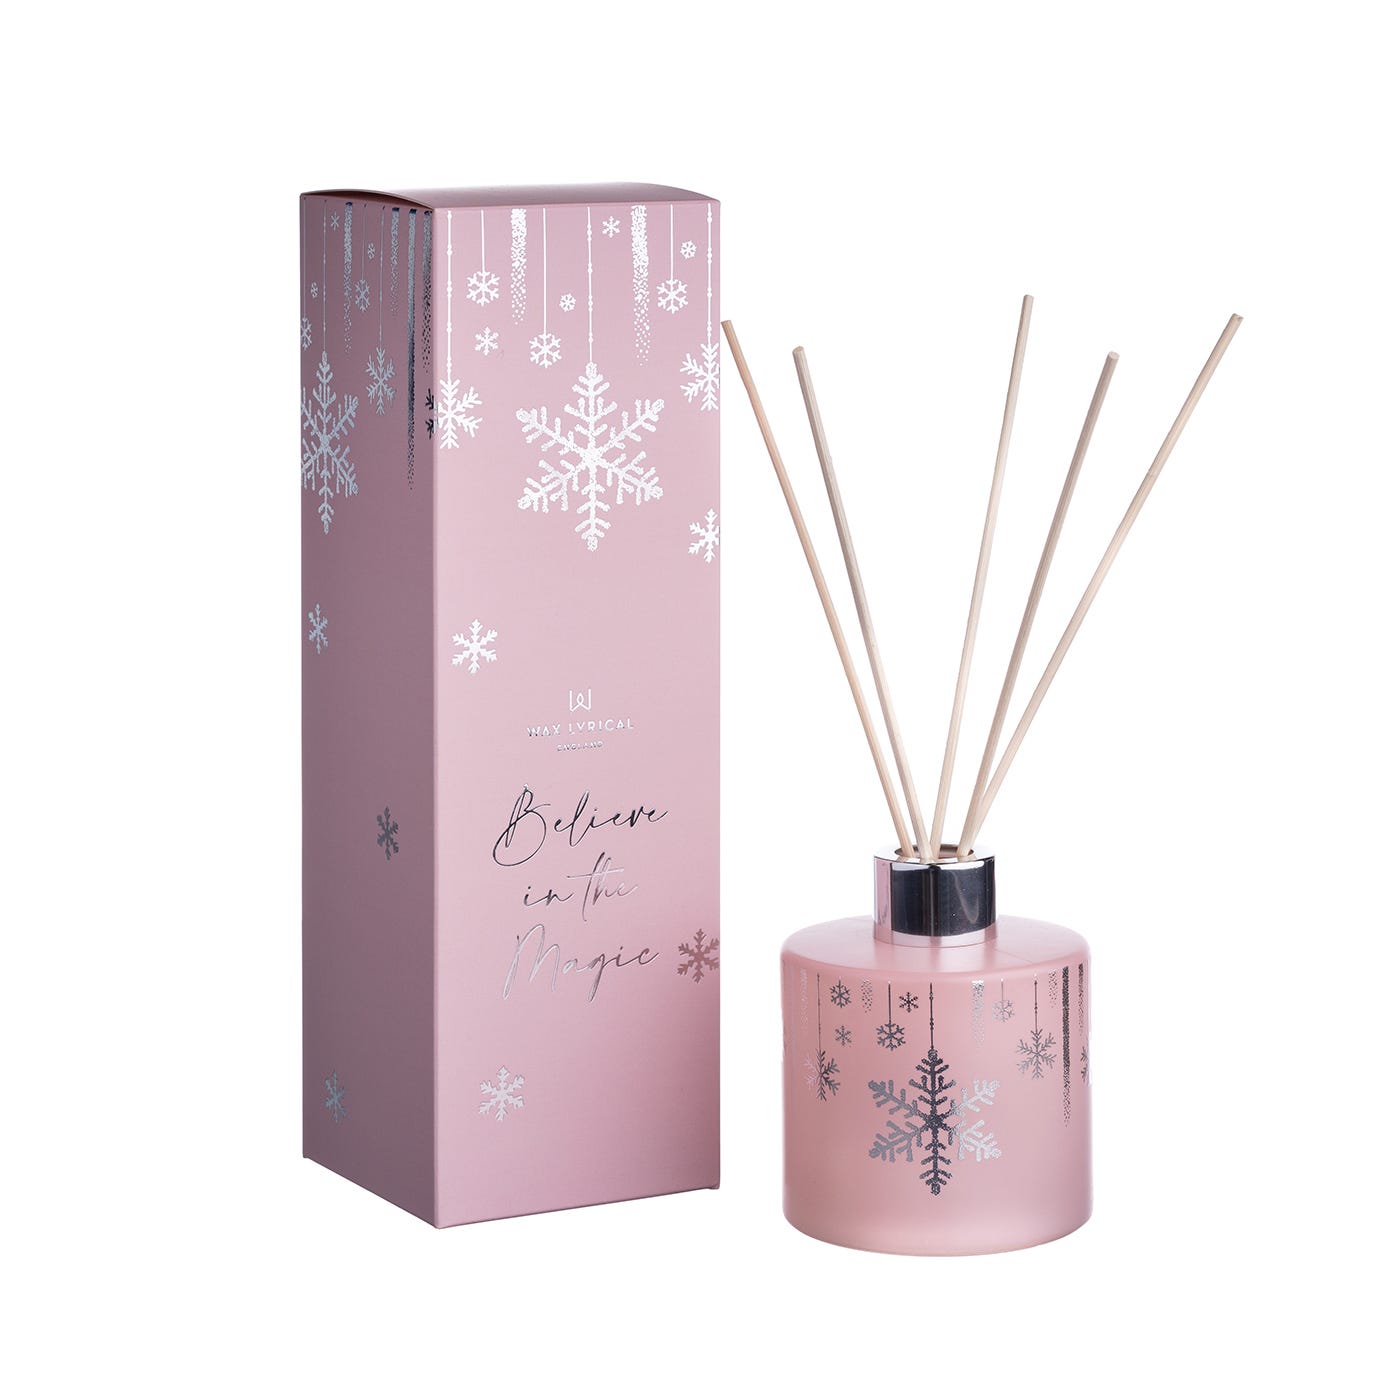 Believe in the Magic reed diffuser